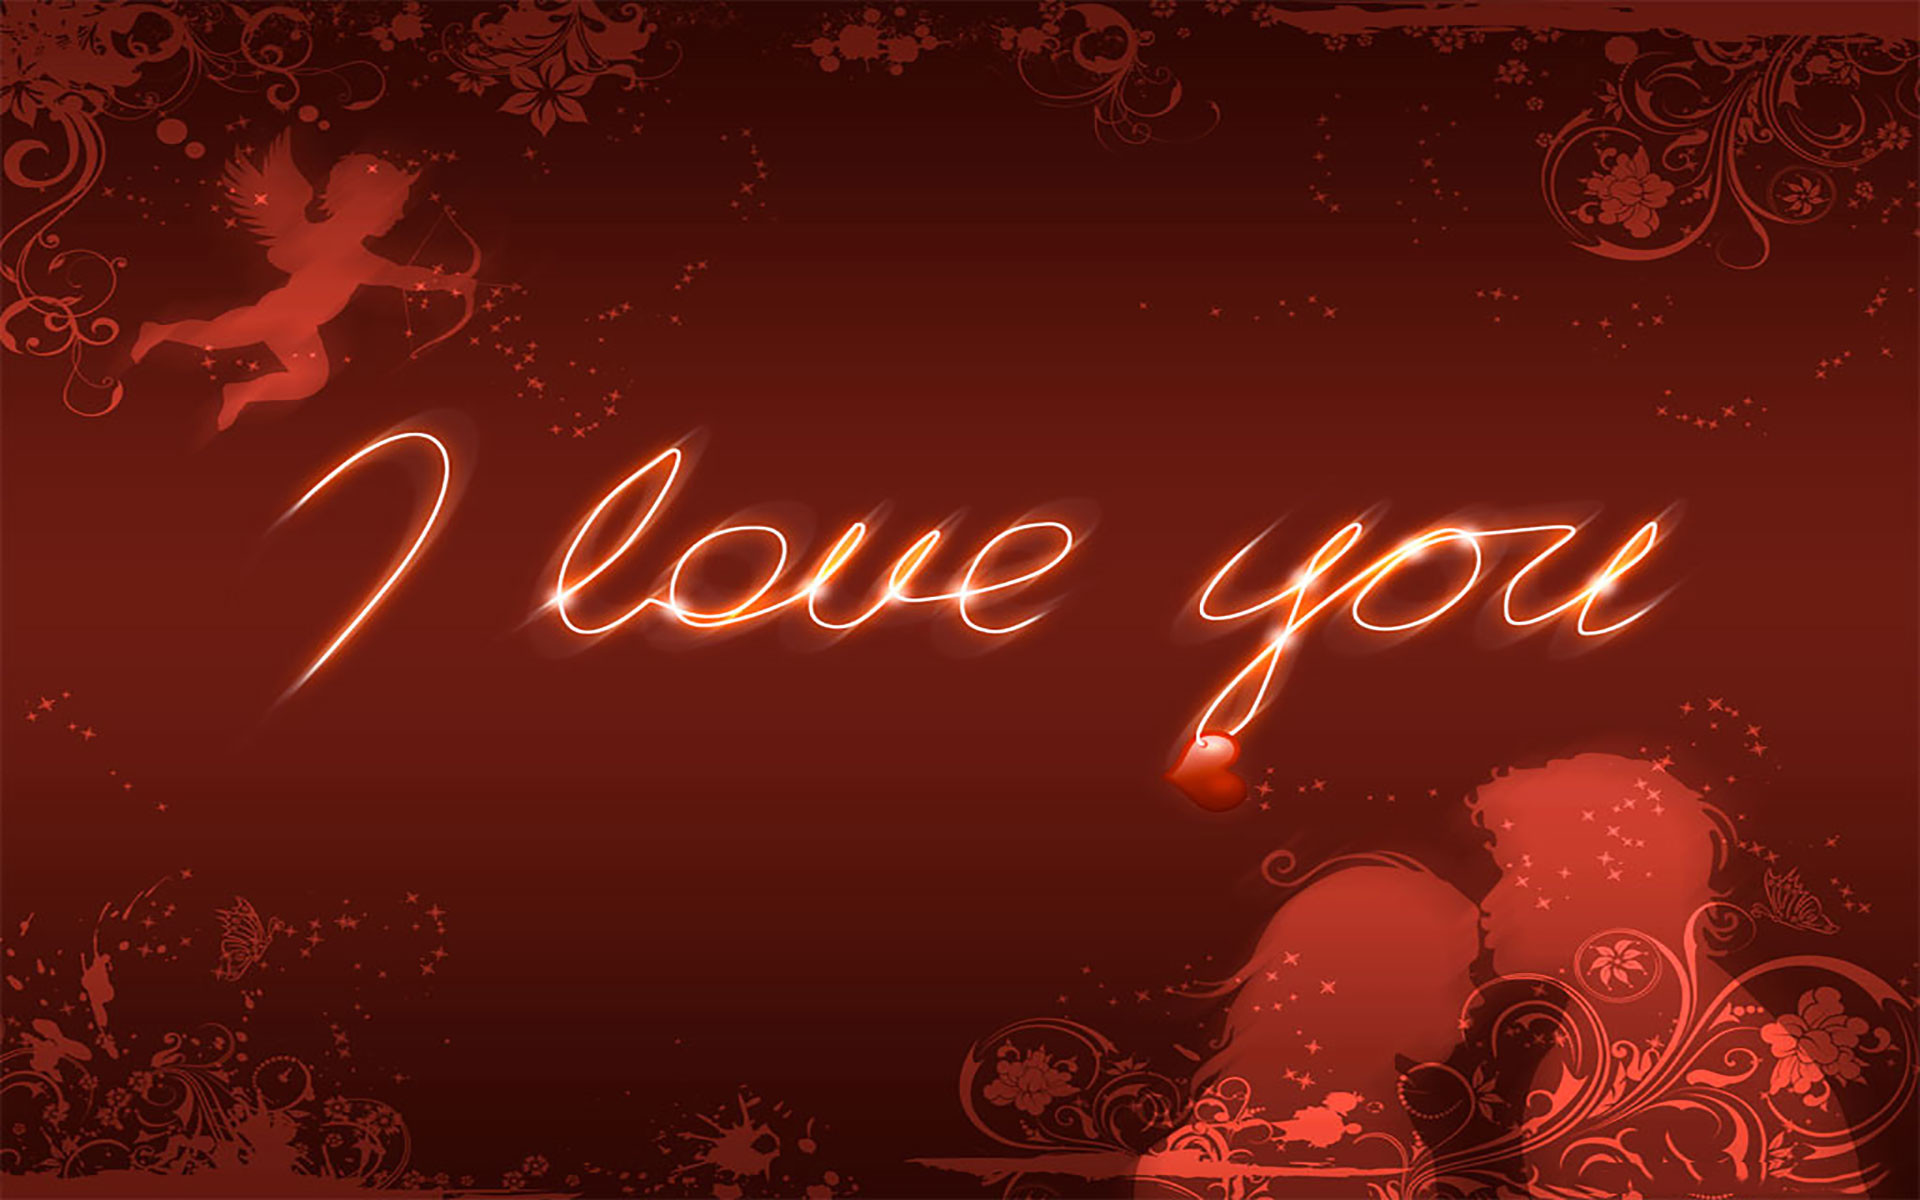 1920x1200 I Love You Images For Her wallpapers (48 Wallpapers)